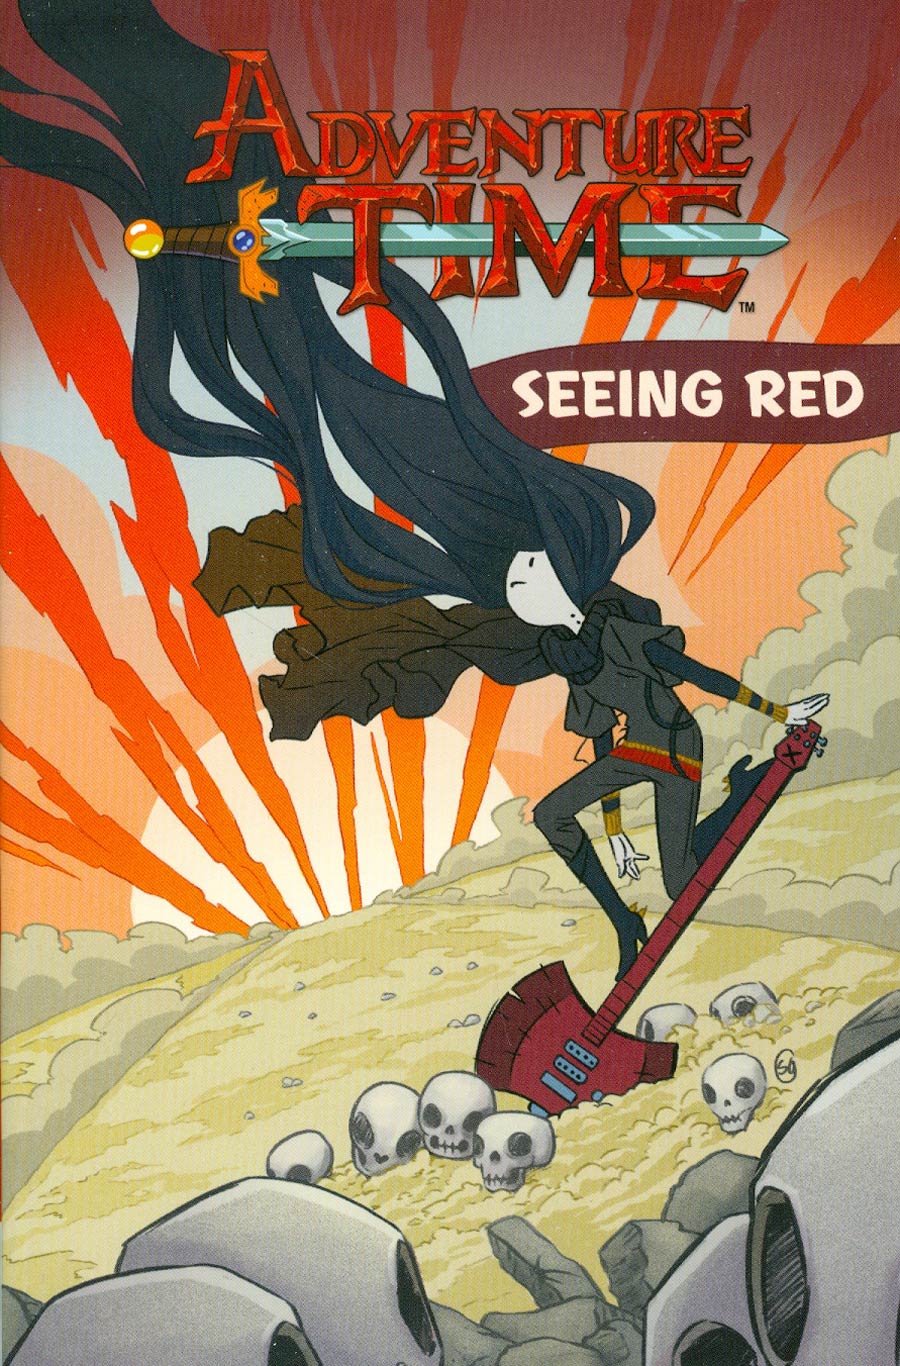 Adventure Time Original Graphic Novel Vol 3 Seeing Red TP